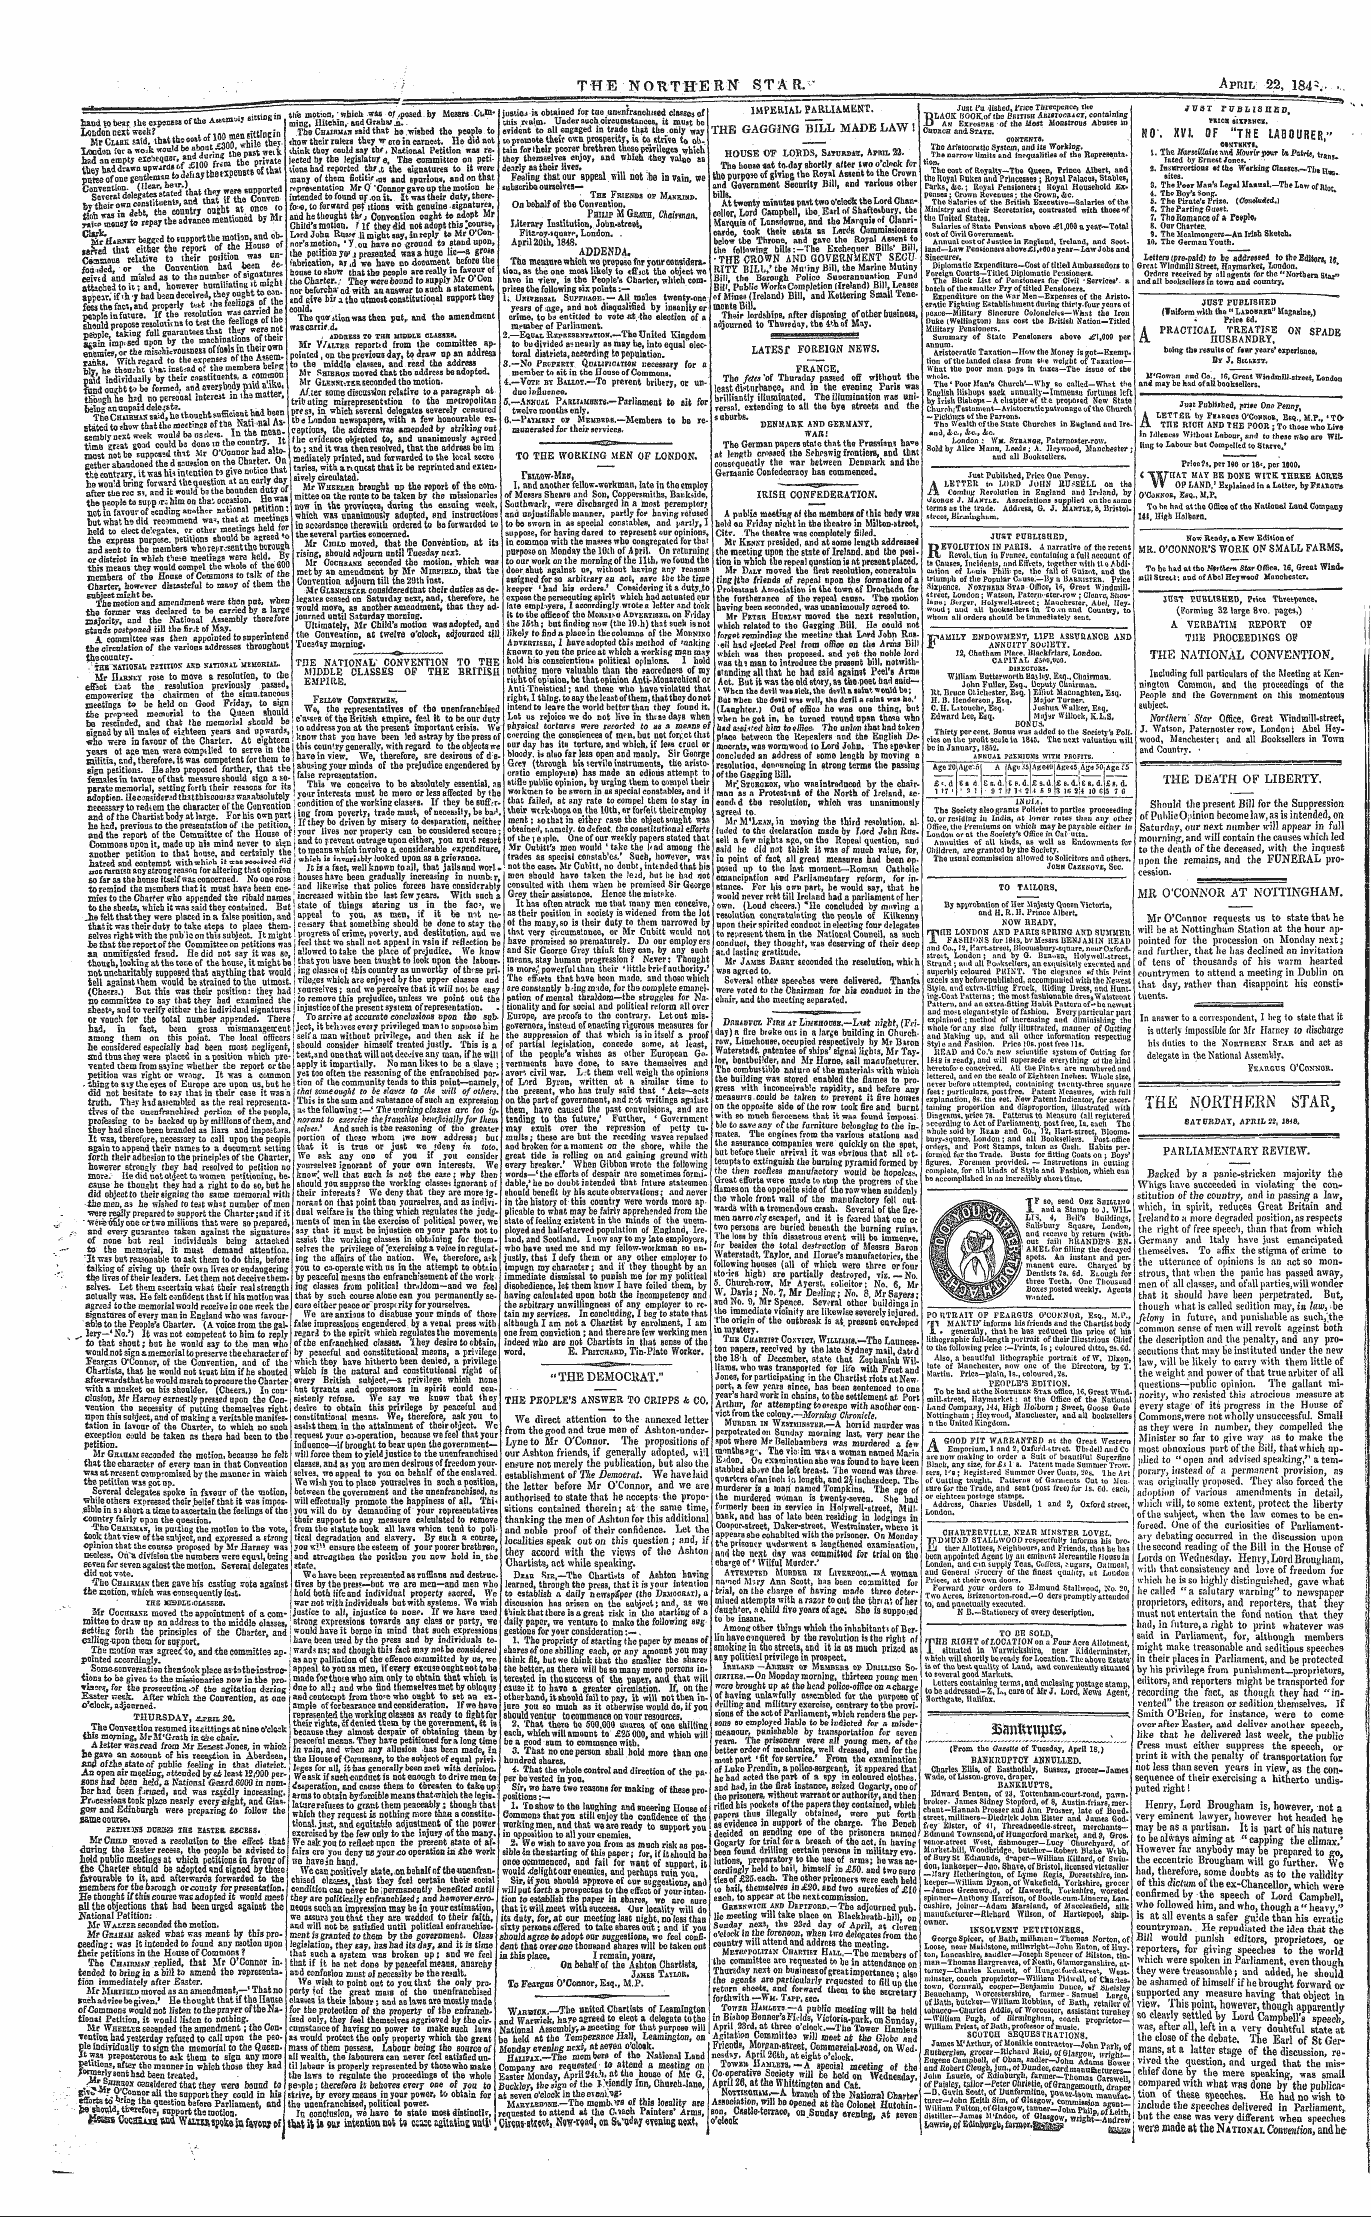 Northern Star (1837-1852): jS F Y, 4th edition - The Northern Star, Saturday, April 22, 1s4s.